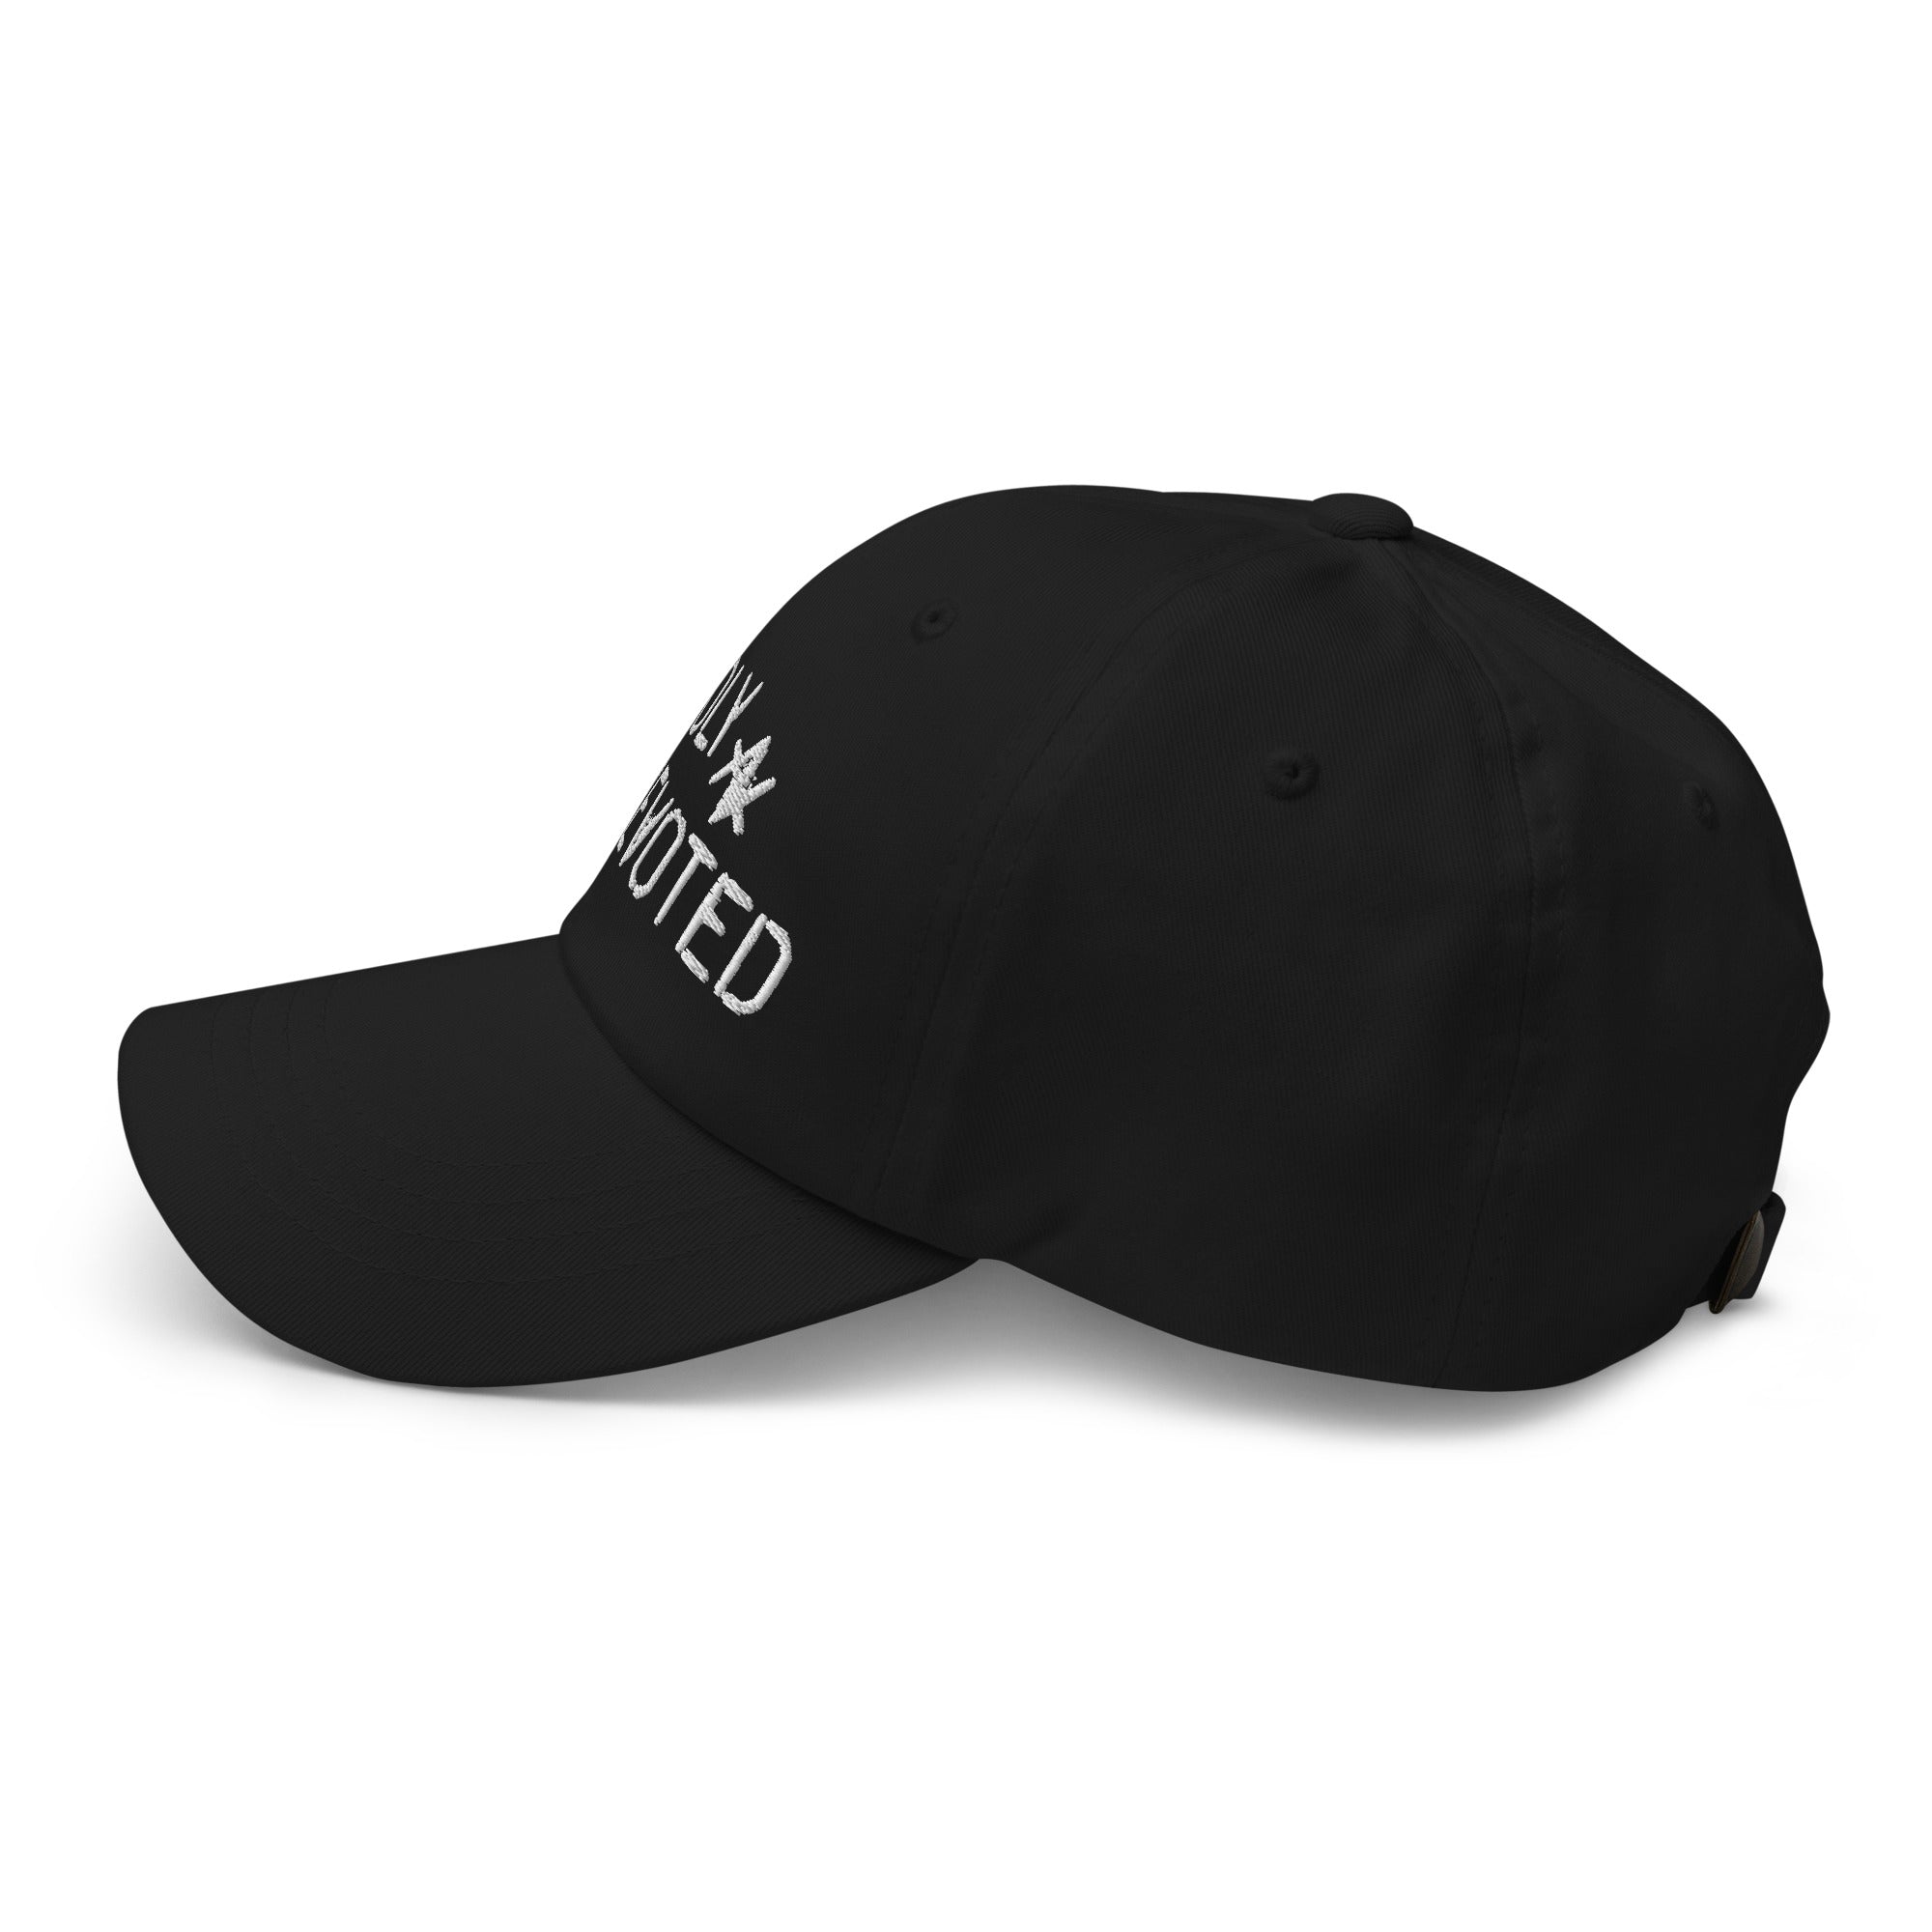 Deadly'N'Devoted hat